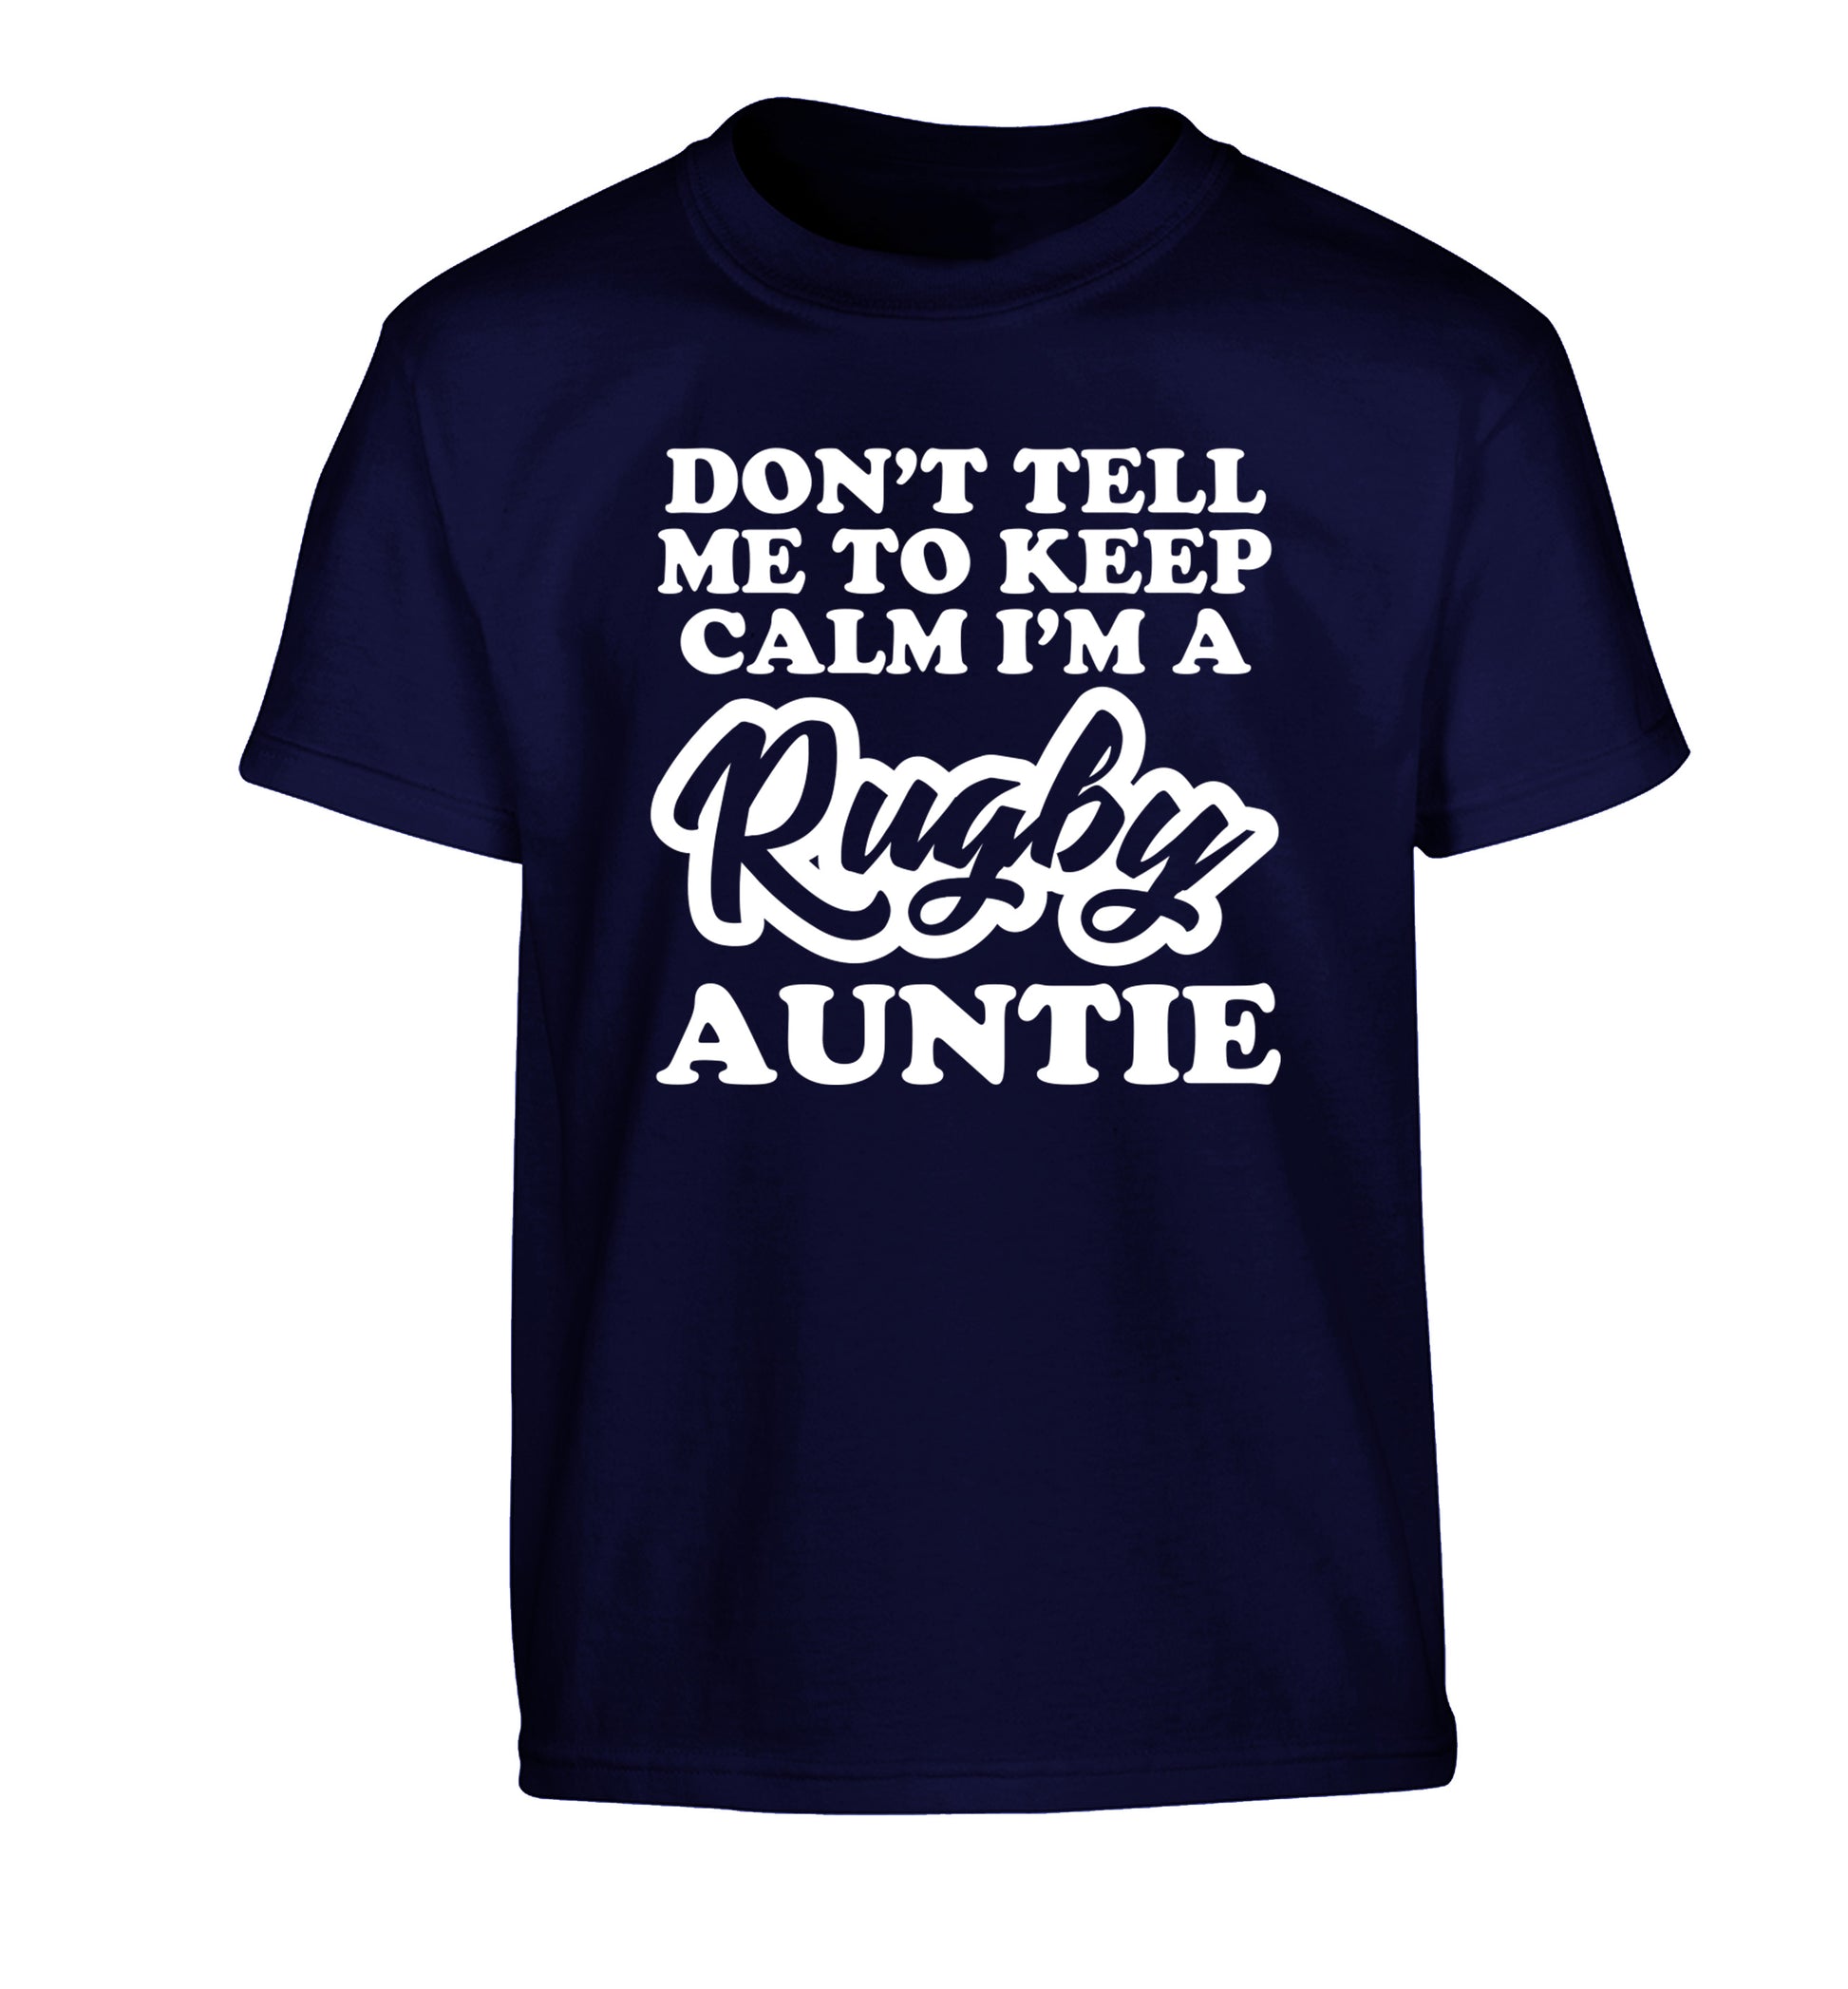 Don't tell me keep calm I'm a rugby auntie Children's navy Tshirt 12-13 Years